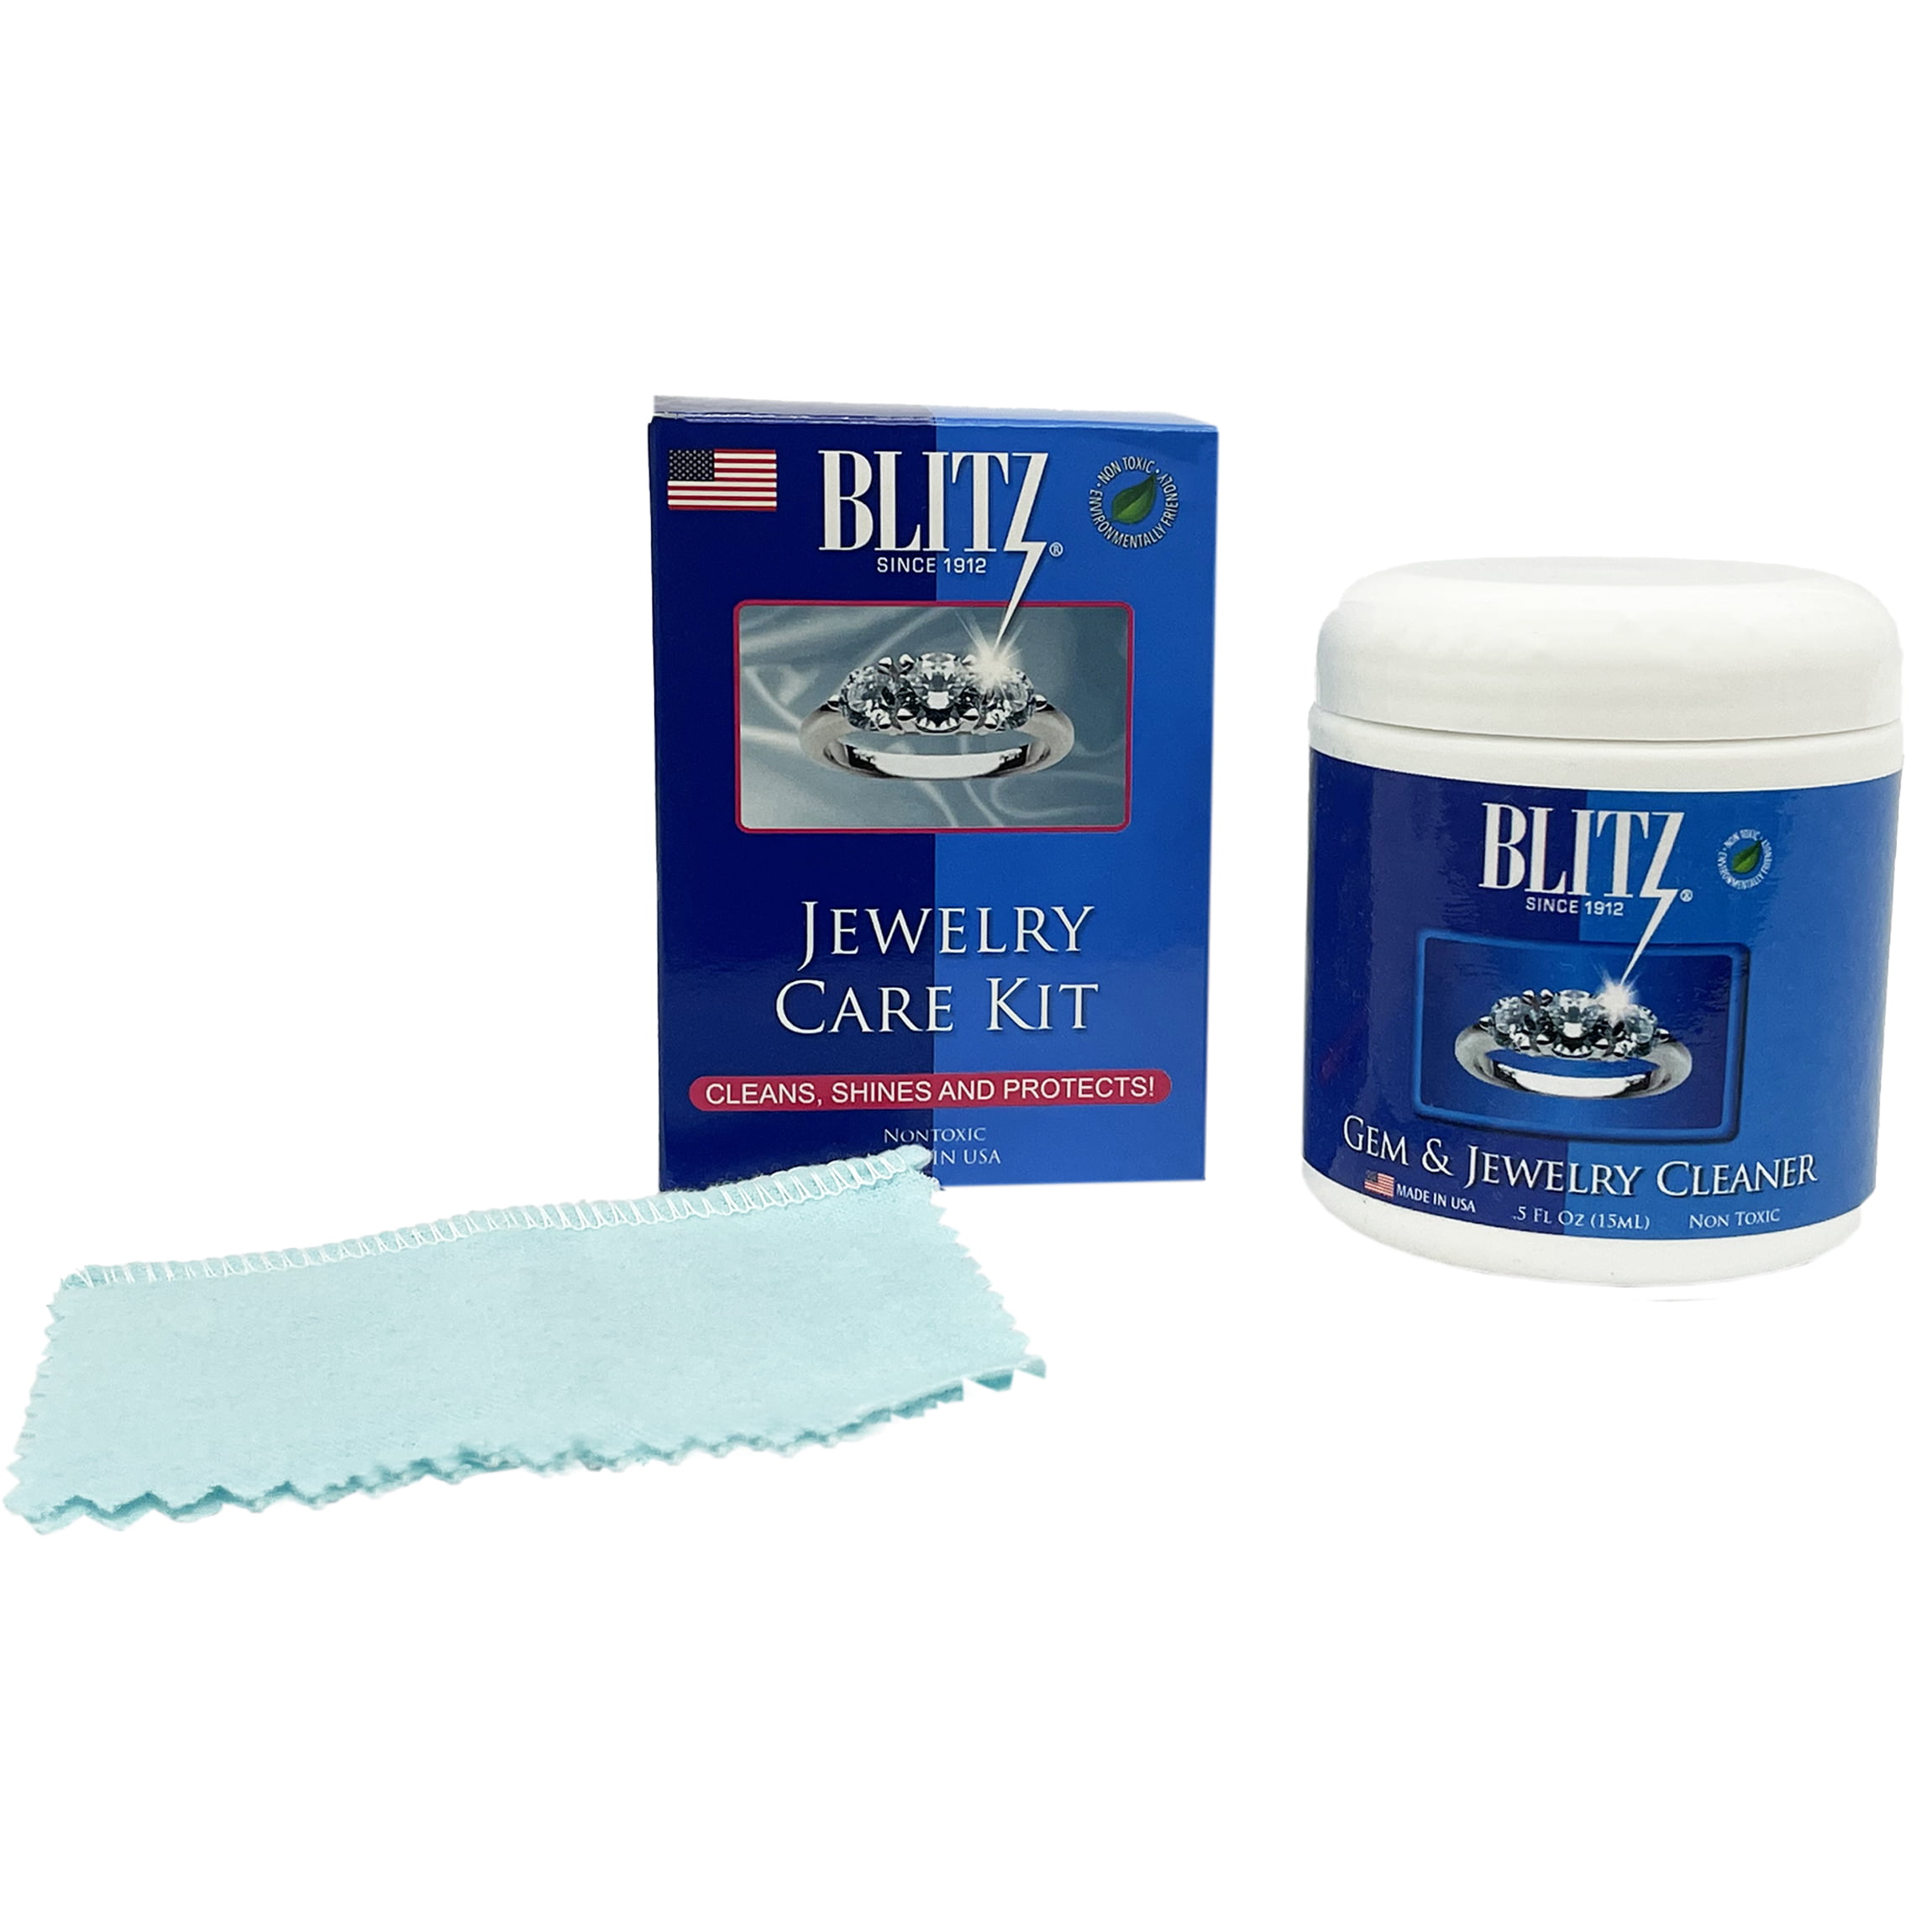 Jewelry Cleaner Concentrates, Wholesale